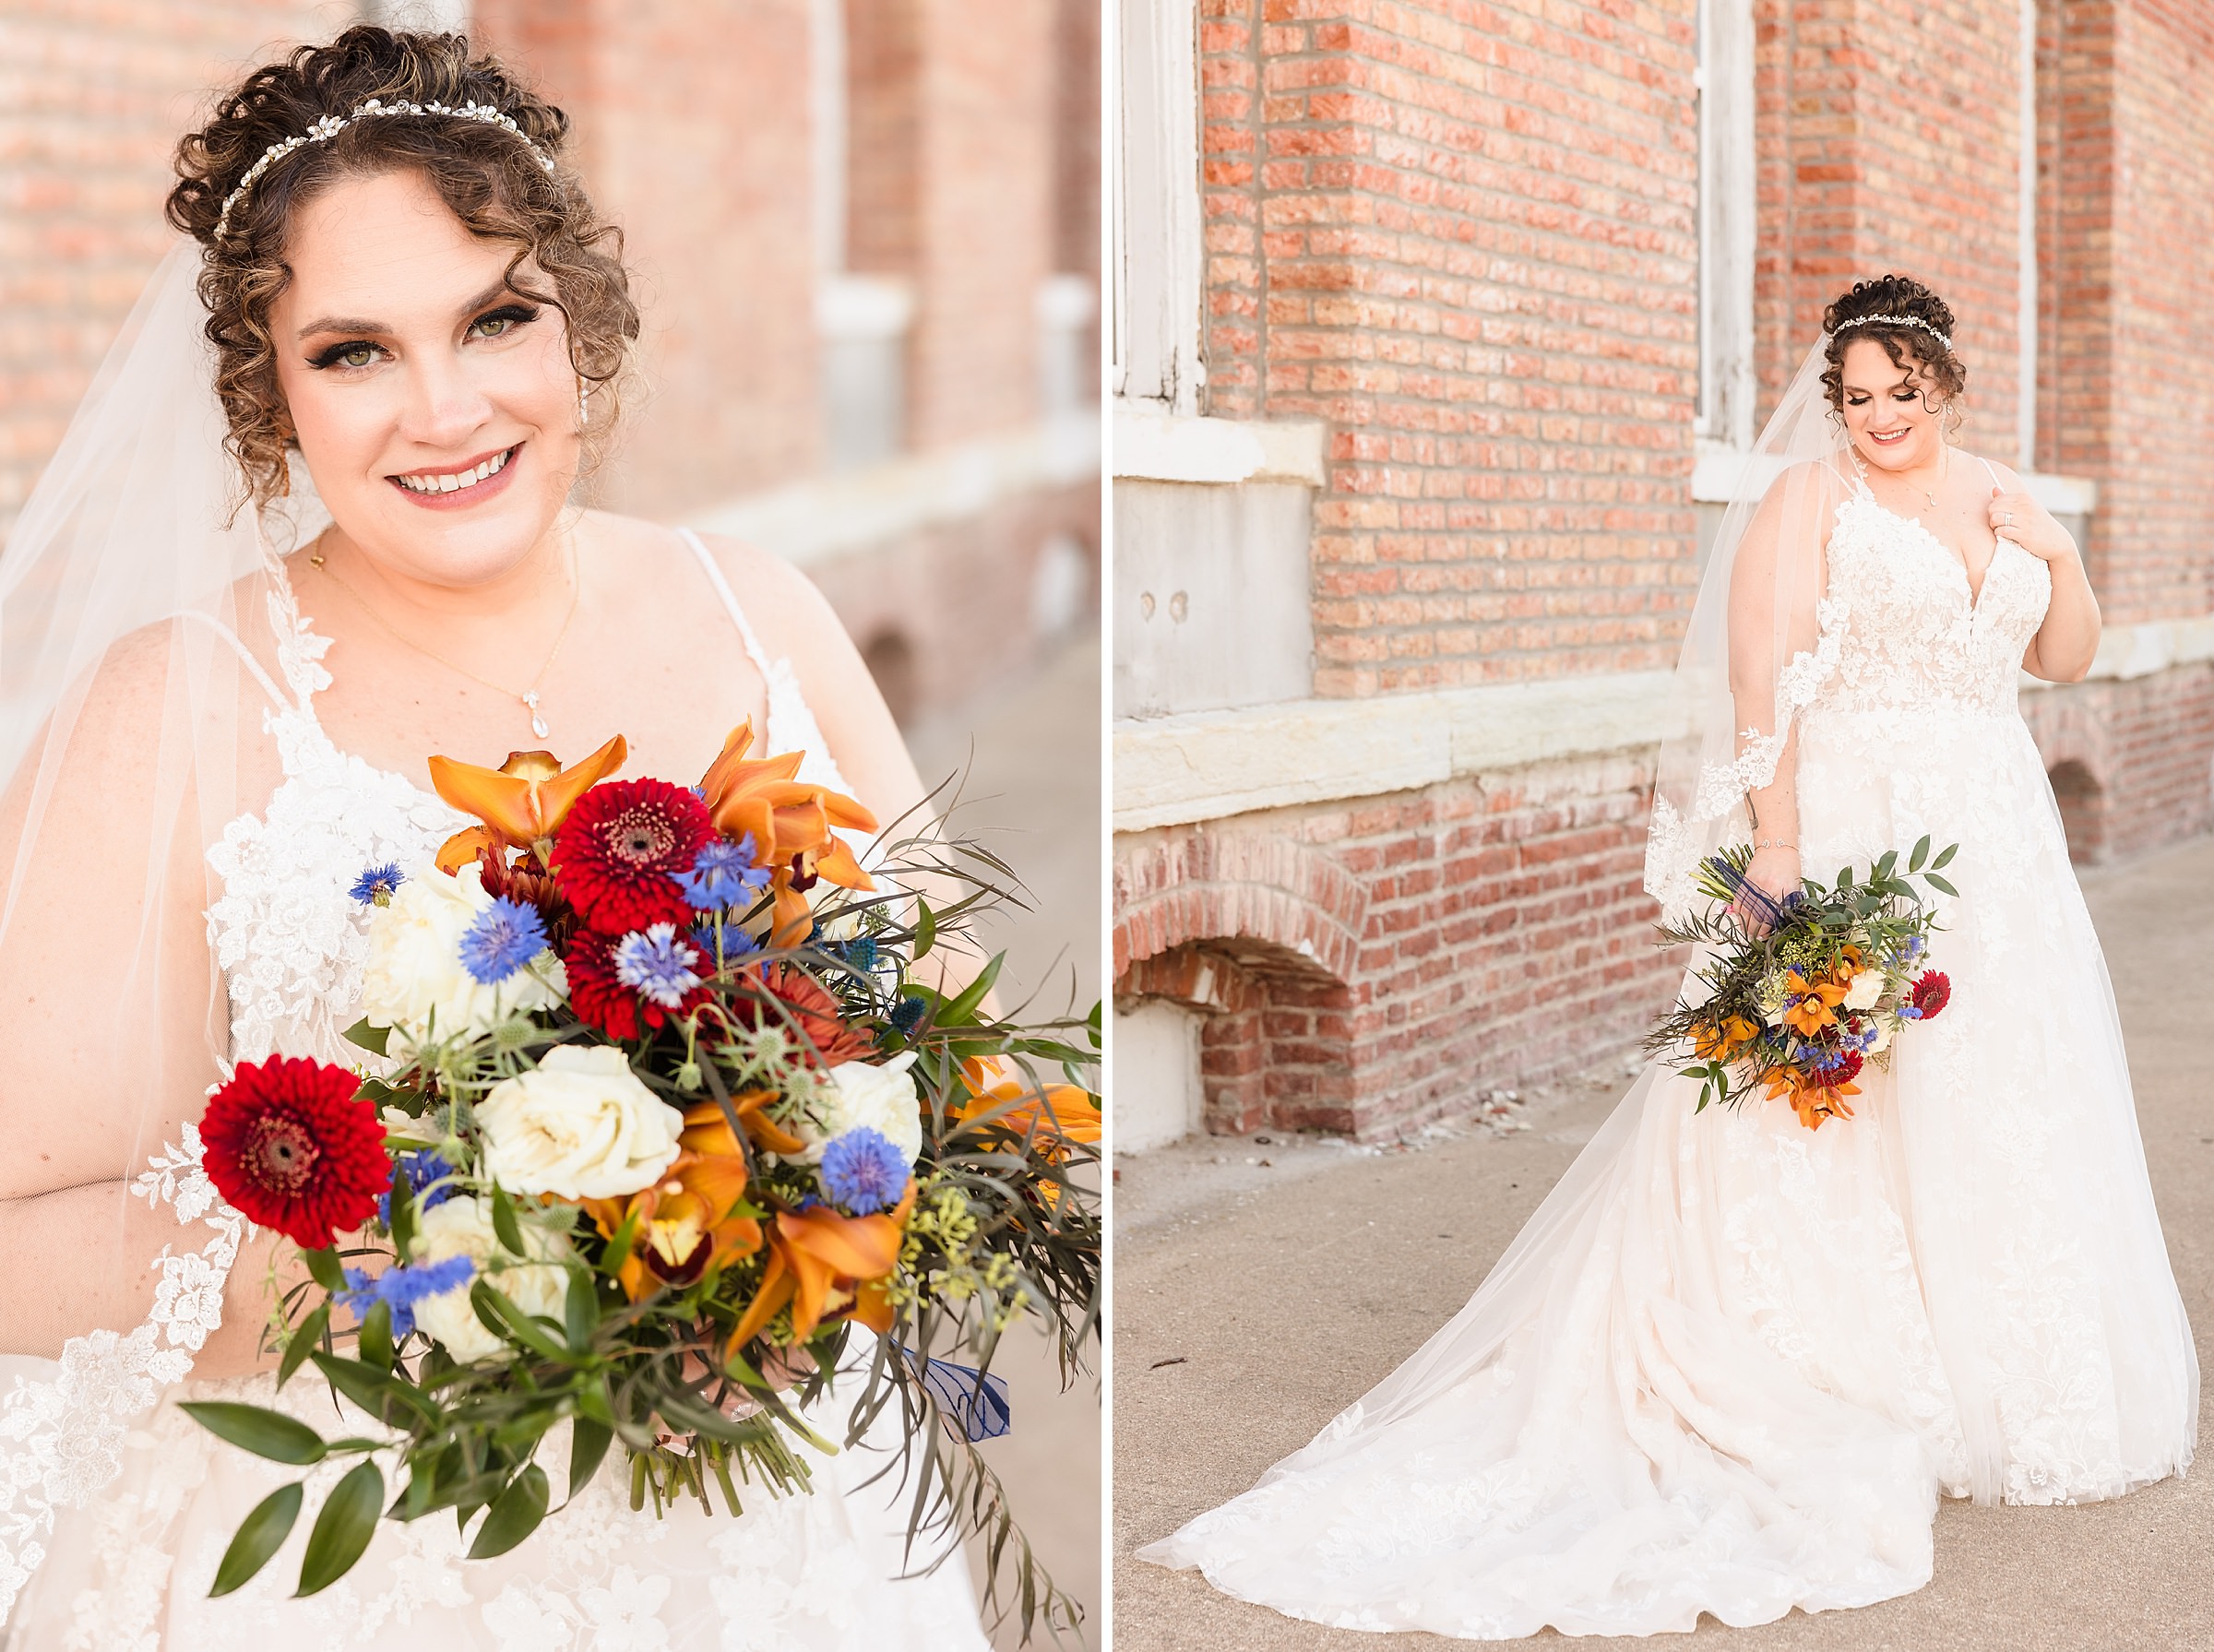 Bridal portraits during a wedding at the Legacy Building in El Paso, Illinois.